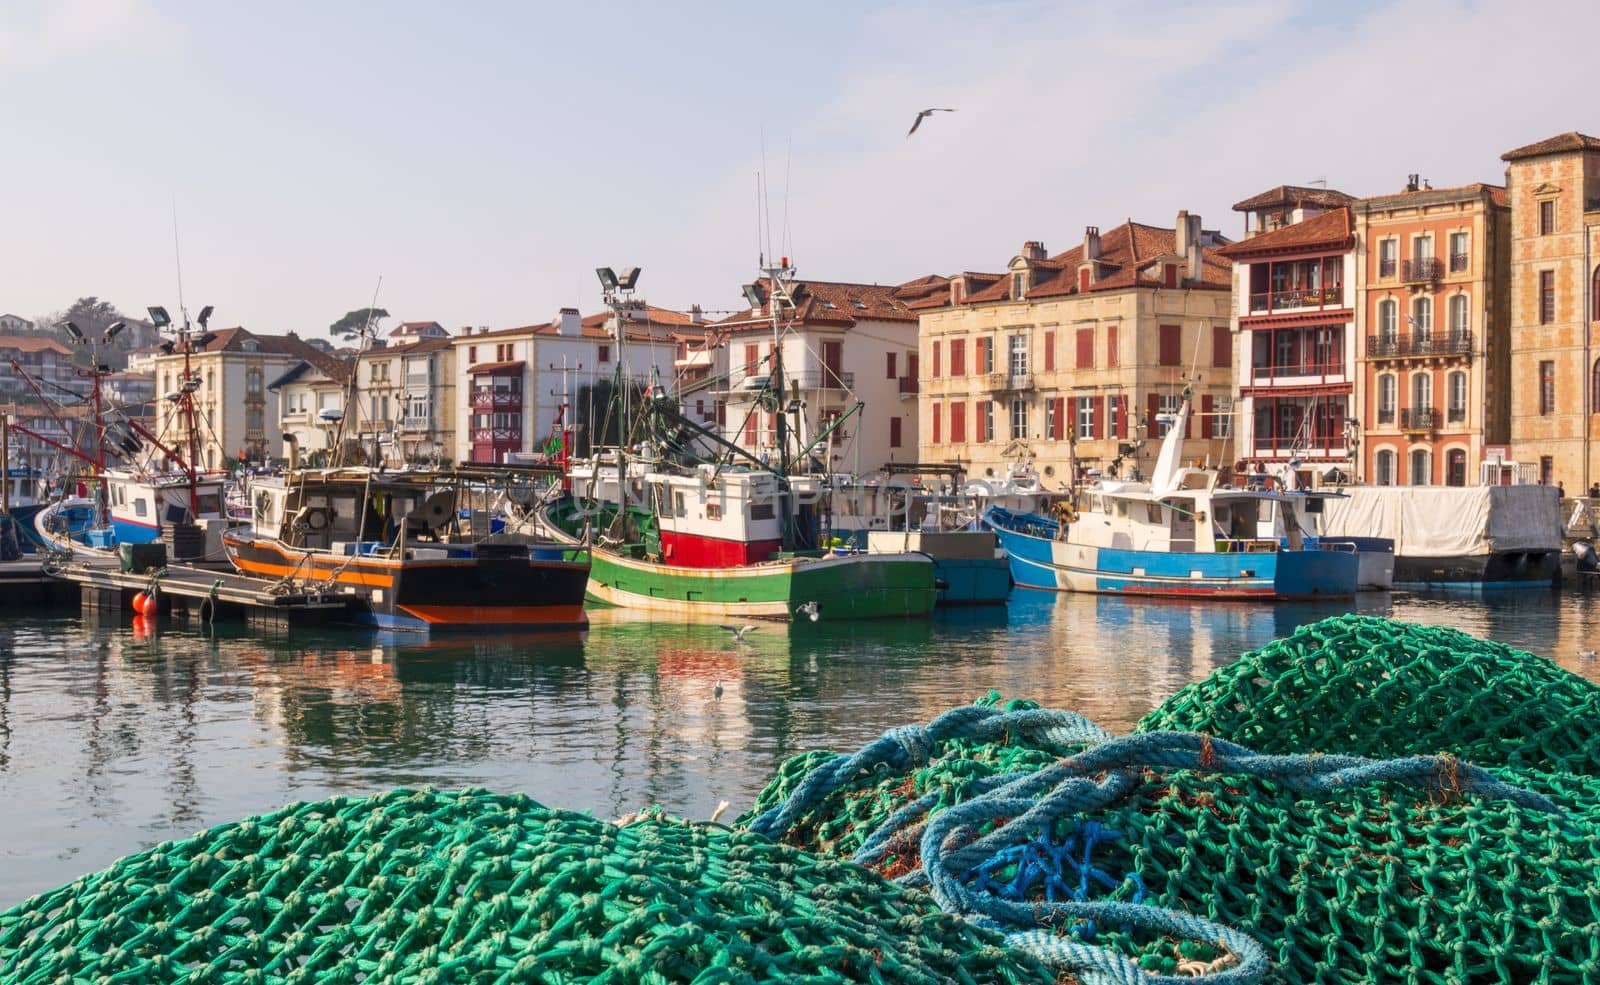 Saint-Jean-de-Luz,  France - February 19, 2023: Fishing port with moored fishing boats a calm sunny day in Saint-Jean-de-Luz, France